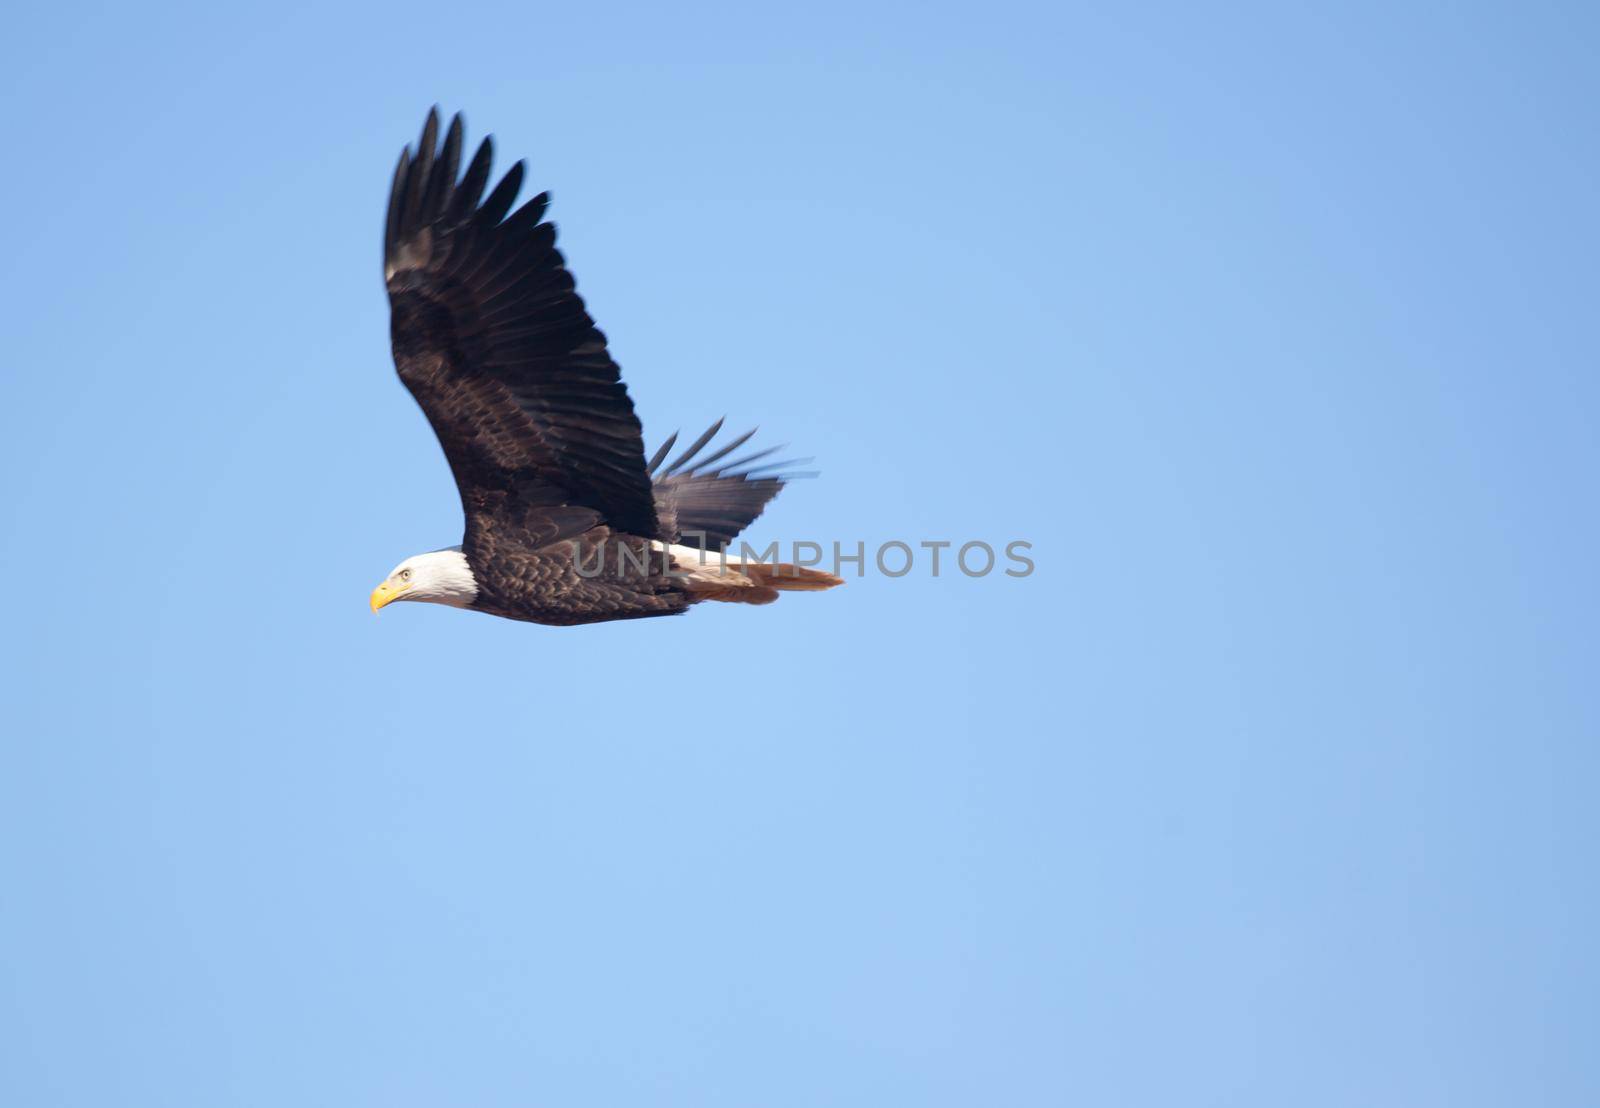 one eagle with white head and brown feathers soars through an empty cloudless blue sky 